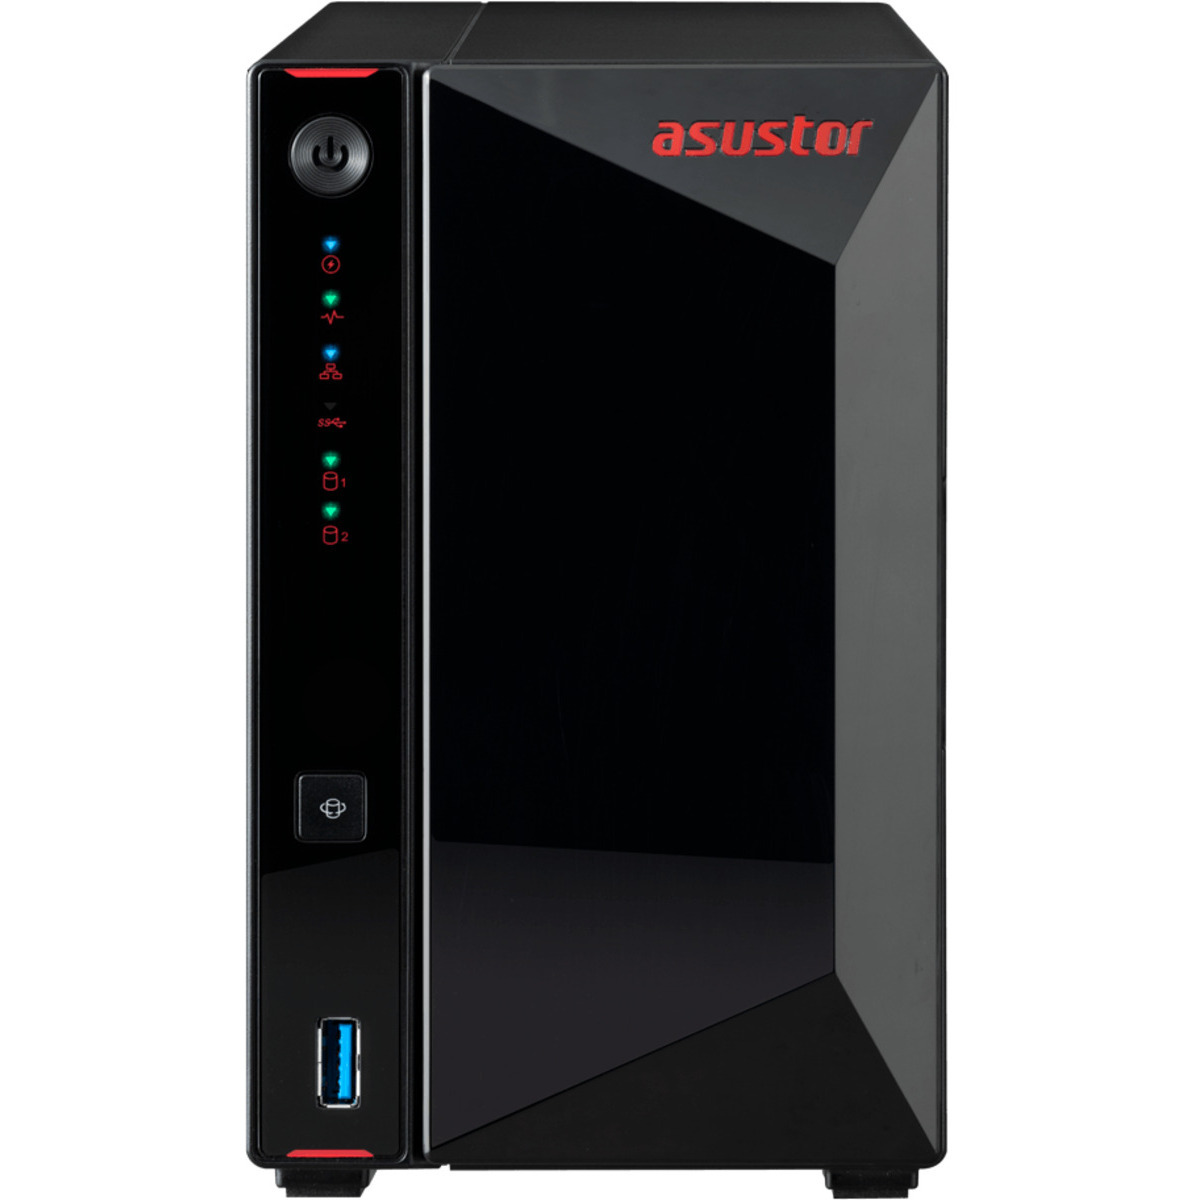 buy $1194 ASUSTOR AS5202T Nimbustor 4tb Desktop NAS - Network Attached Storage Device 2x2000gb Seagate IronWolf 125 ZA2000NM10002 2.5 SATA 6Gb/s SSD NAS Class Drives Installed - Burn-In Tested - FREE RAM UPGRADE - nas headquarters buy network attached storage server device das new raid-5 free shipping usa AS5202T Nimbustor